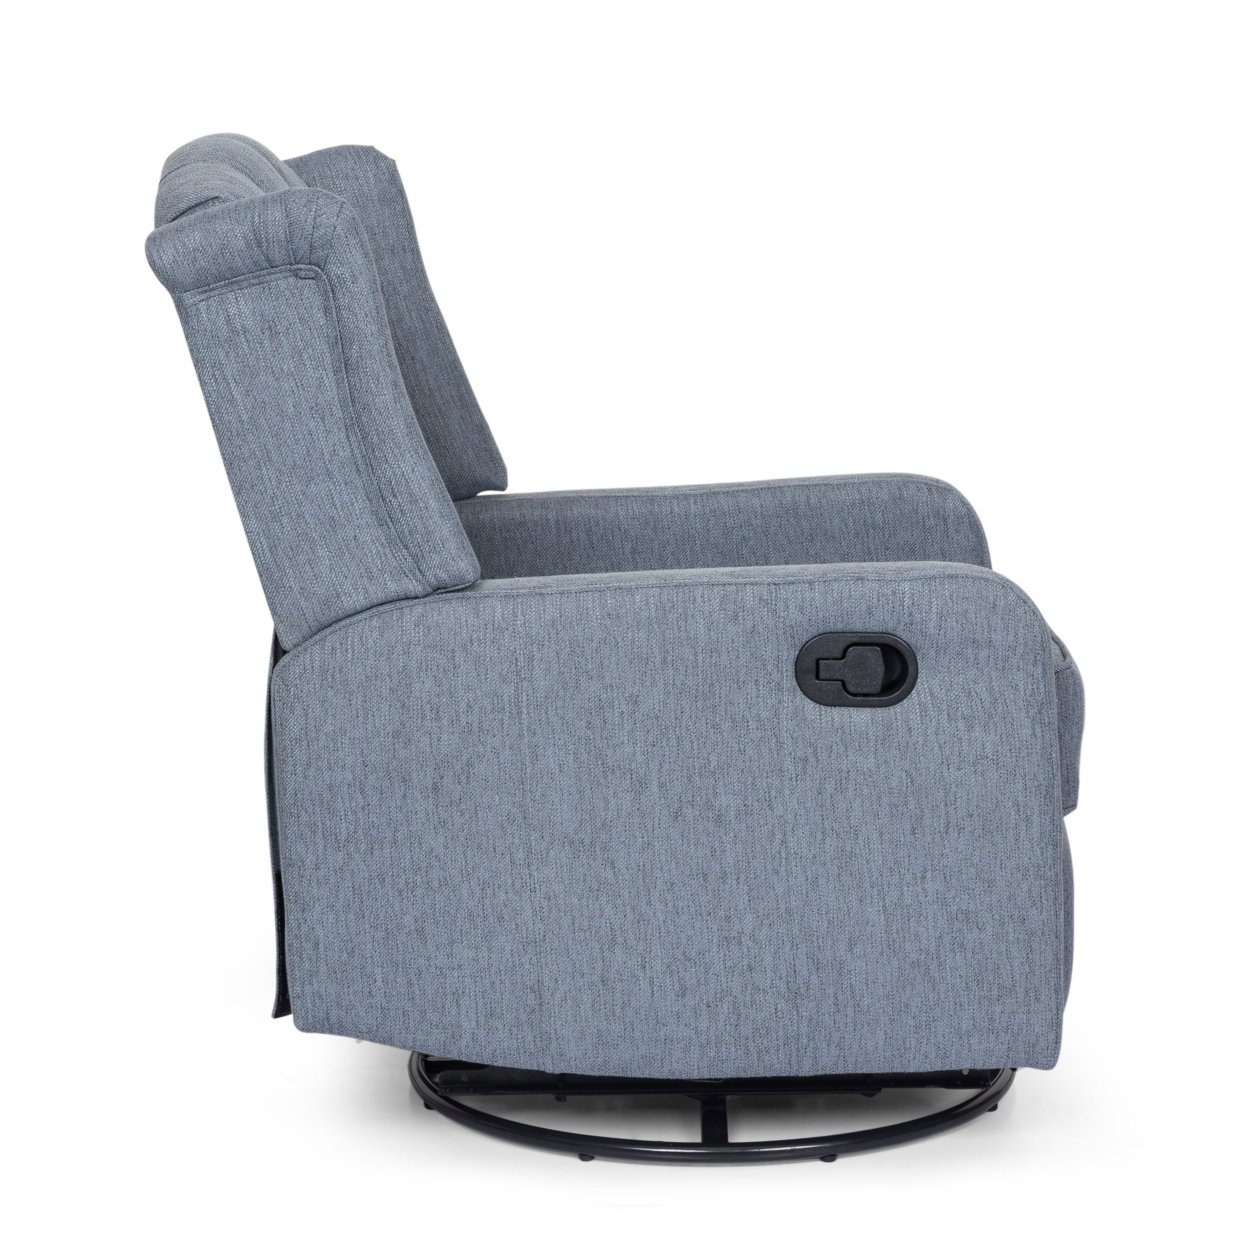 Houck Contemporary Tufted Wingback Swivel Recliner - Black/charcoal